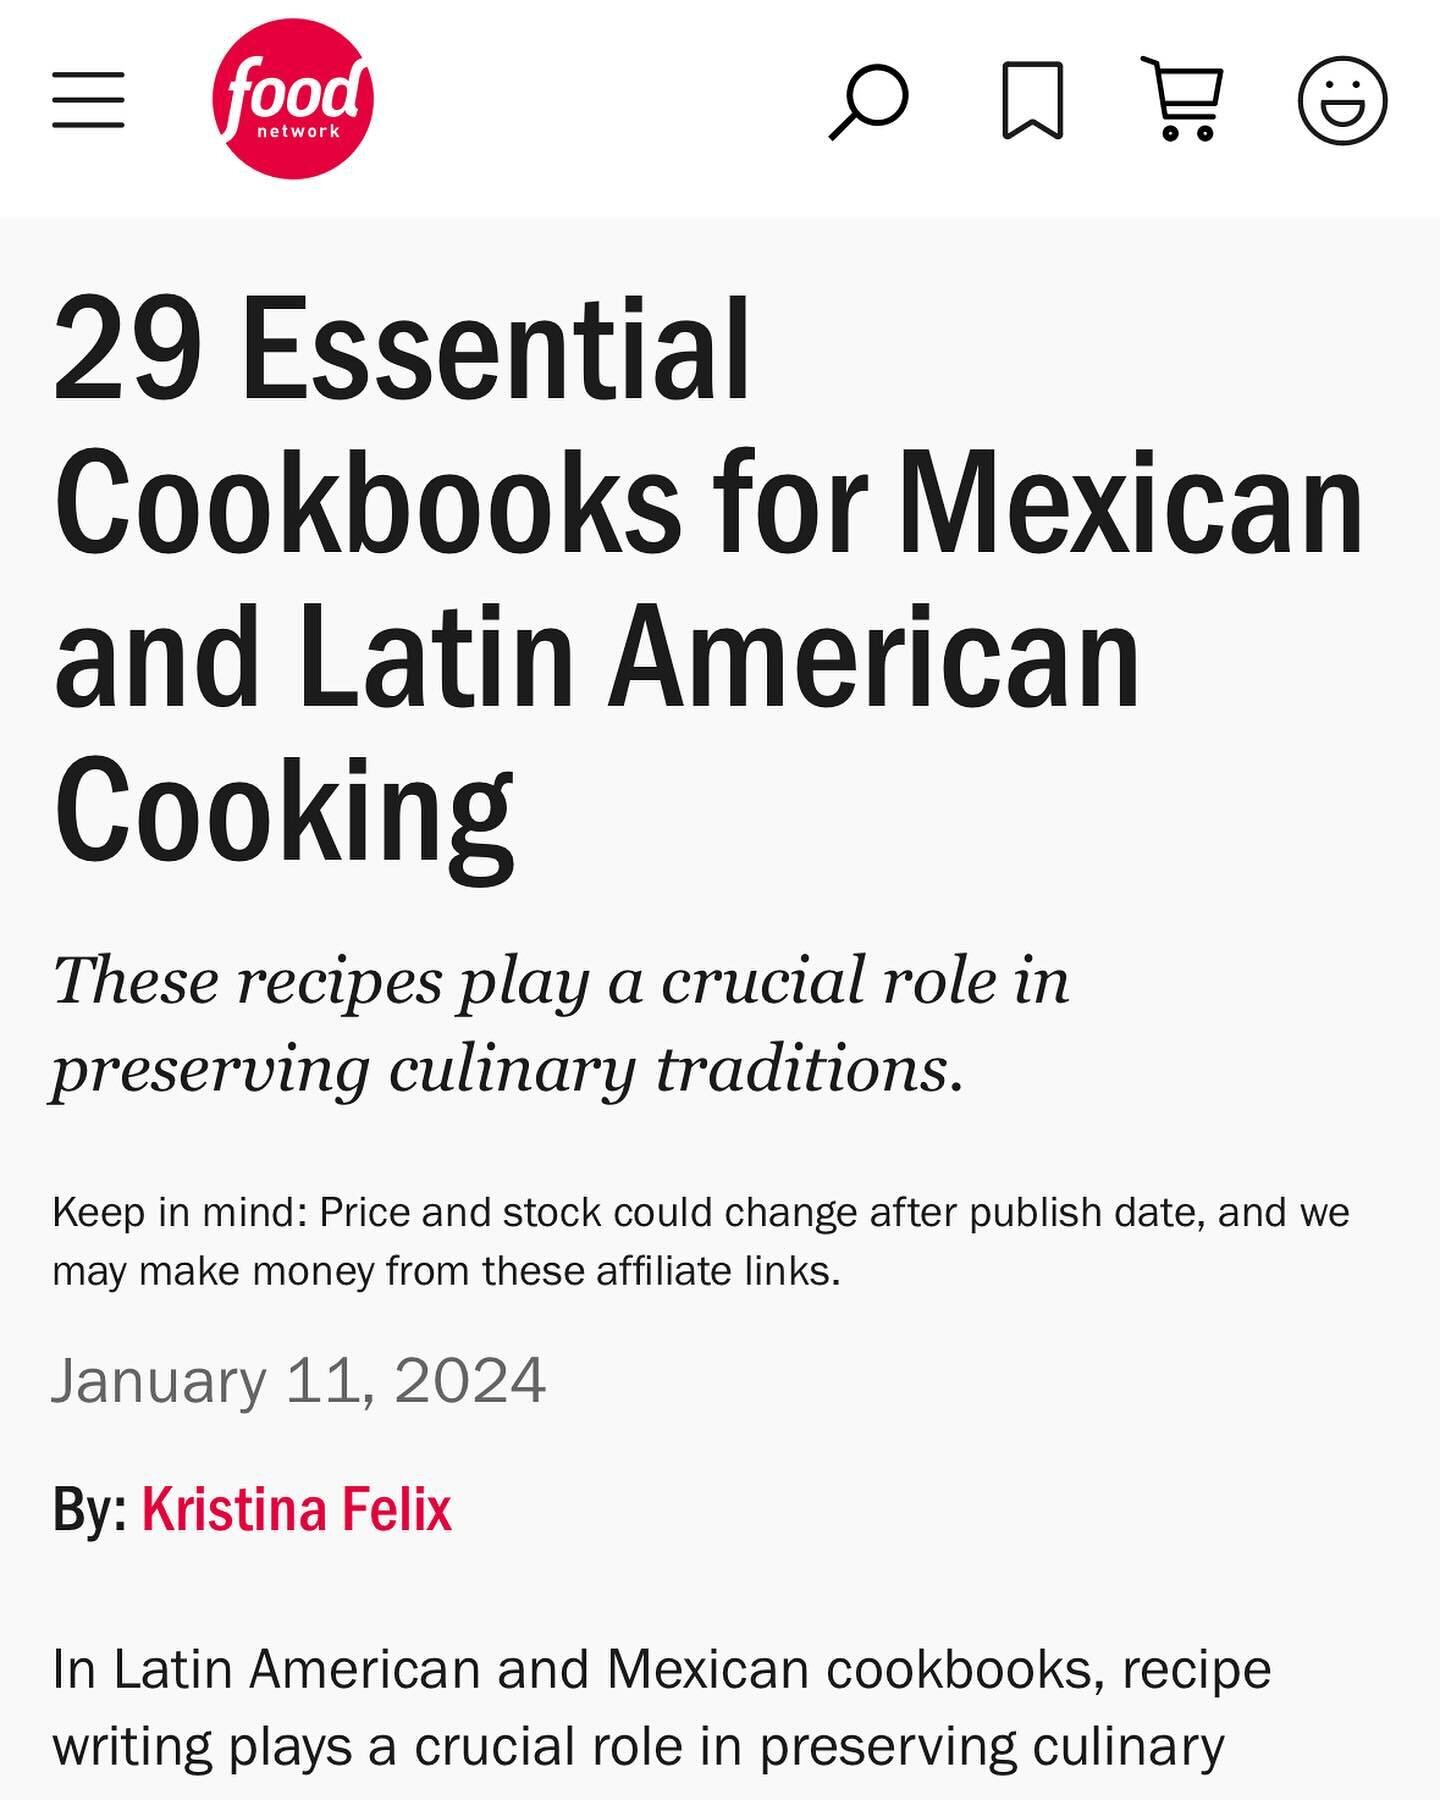 I wrote a roundup of Mexican and Latin American Cookbooks and it was published long winded notes and all. Every &ldquo;roundup&rdquo; and &ldquo;essentials&rdquo; list is a frame that edits a wide landscape down to one perspective. 

My perspective i